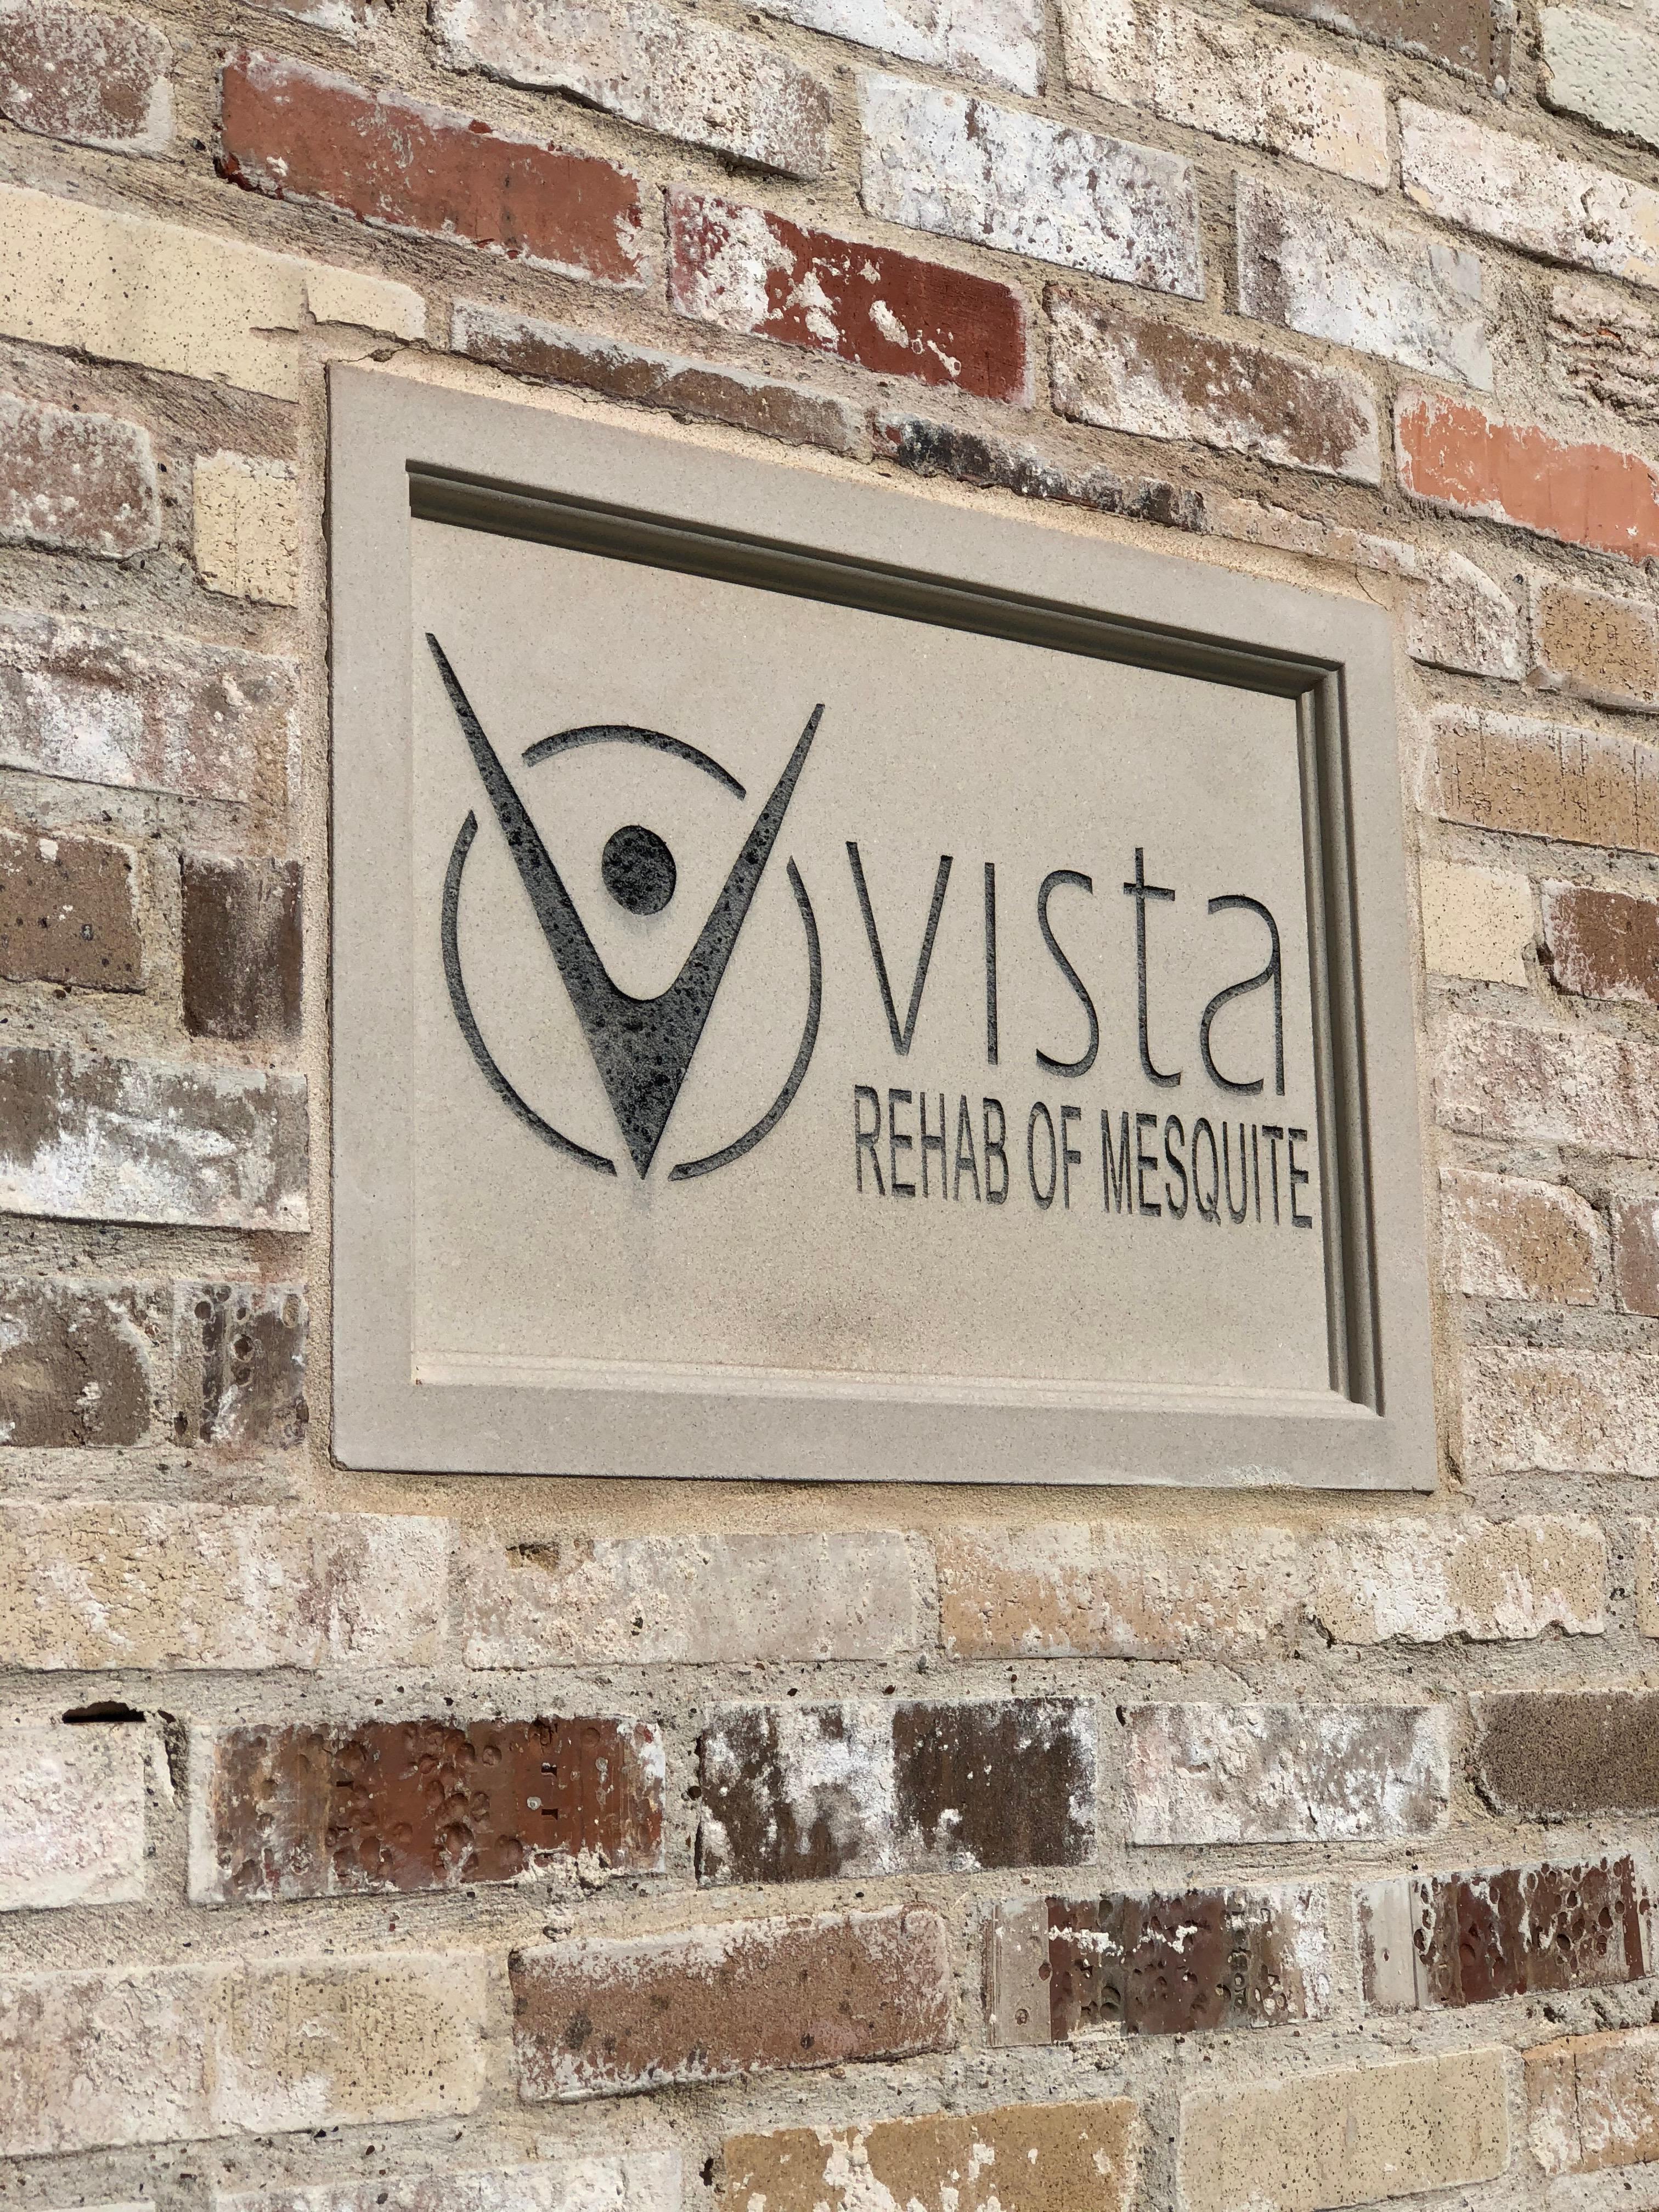 Vista Physical Therapy
2758 N Galloway Ave
Mesquite